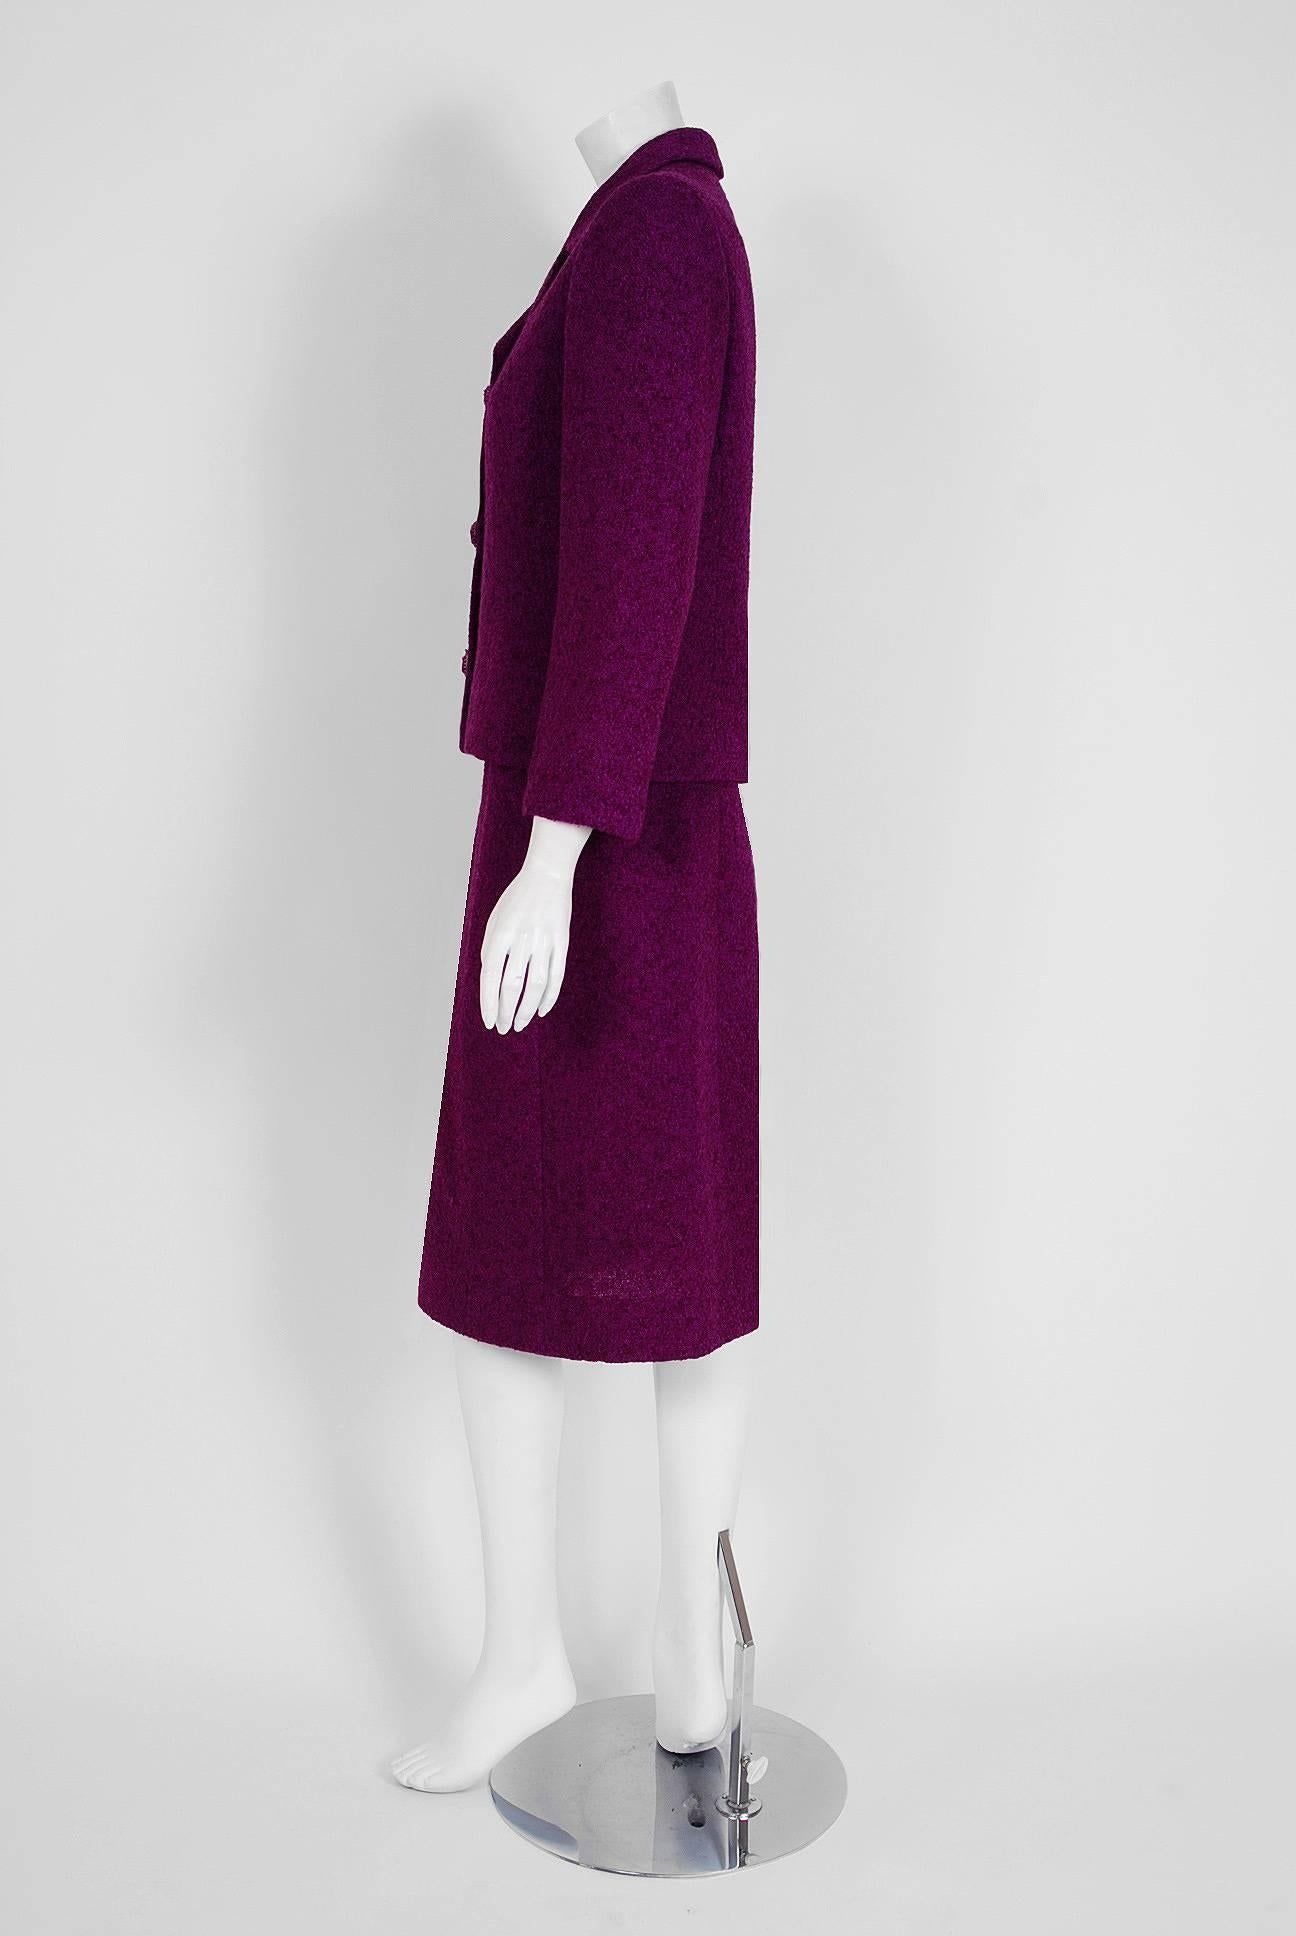 1967 Balenciaga Haute-Couture Royal Purple Wool Double-Breasted Mod Skirt Suit  In Excellent Condition In Beverly Hills, CA